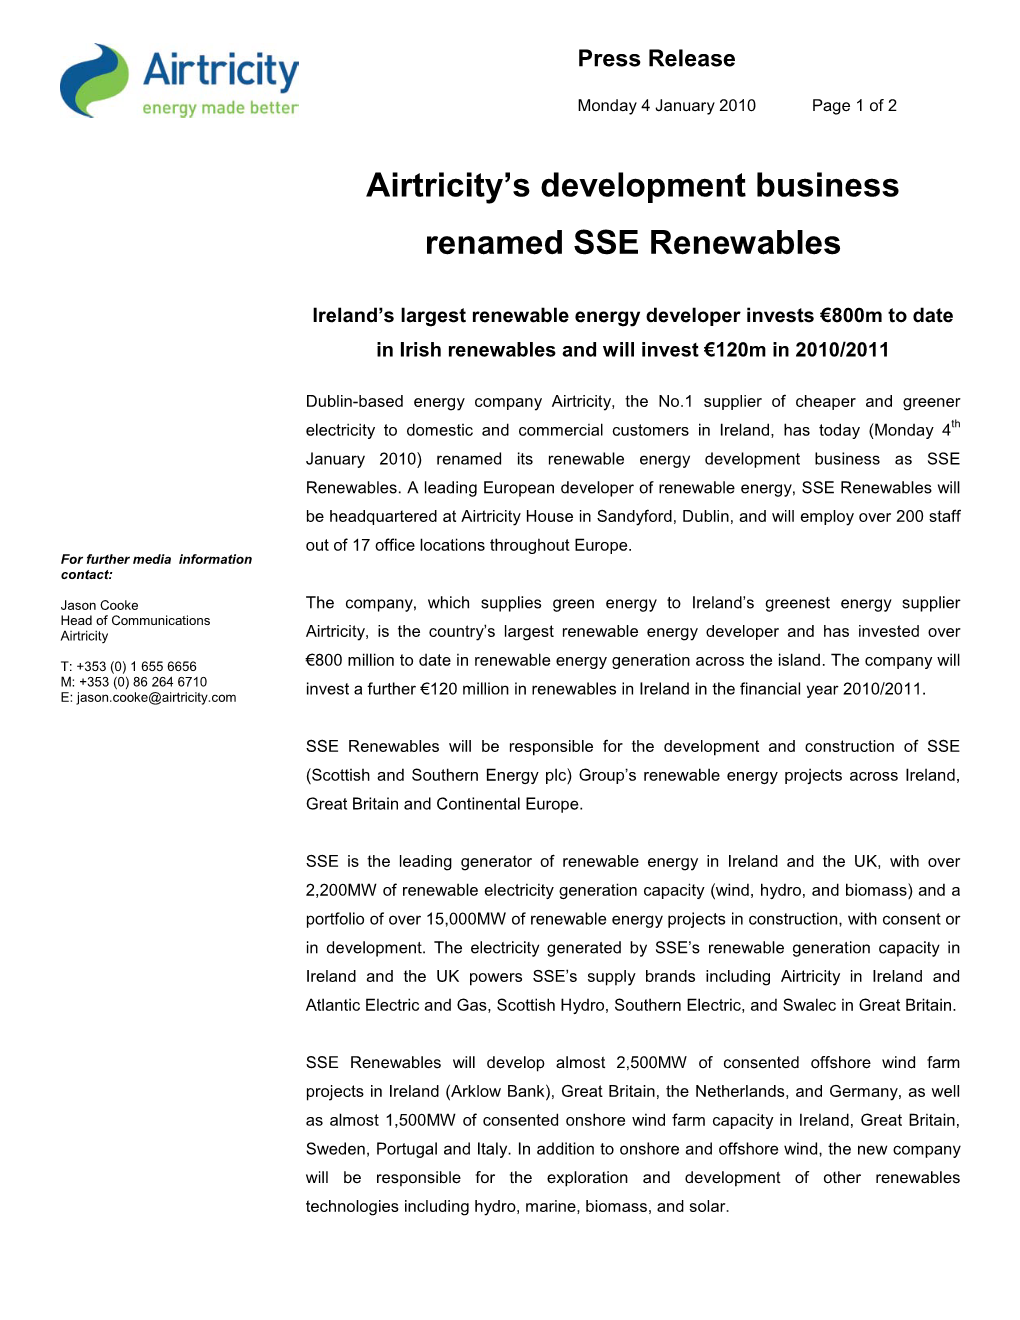 Airtricity's Development Business Renamed SSE Renewables